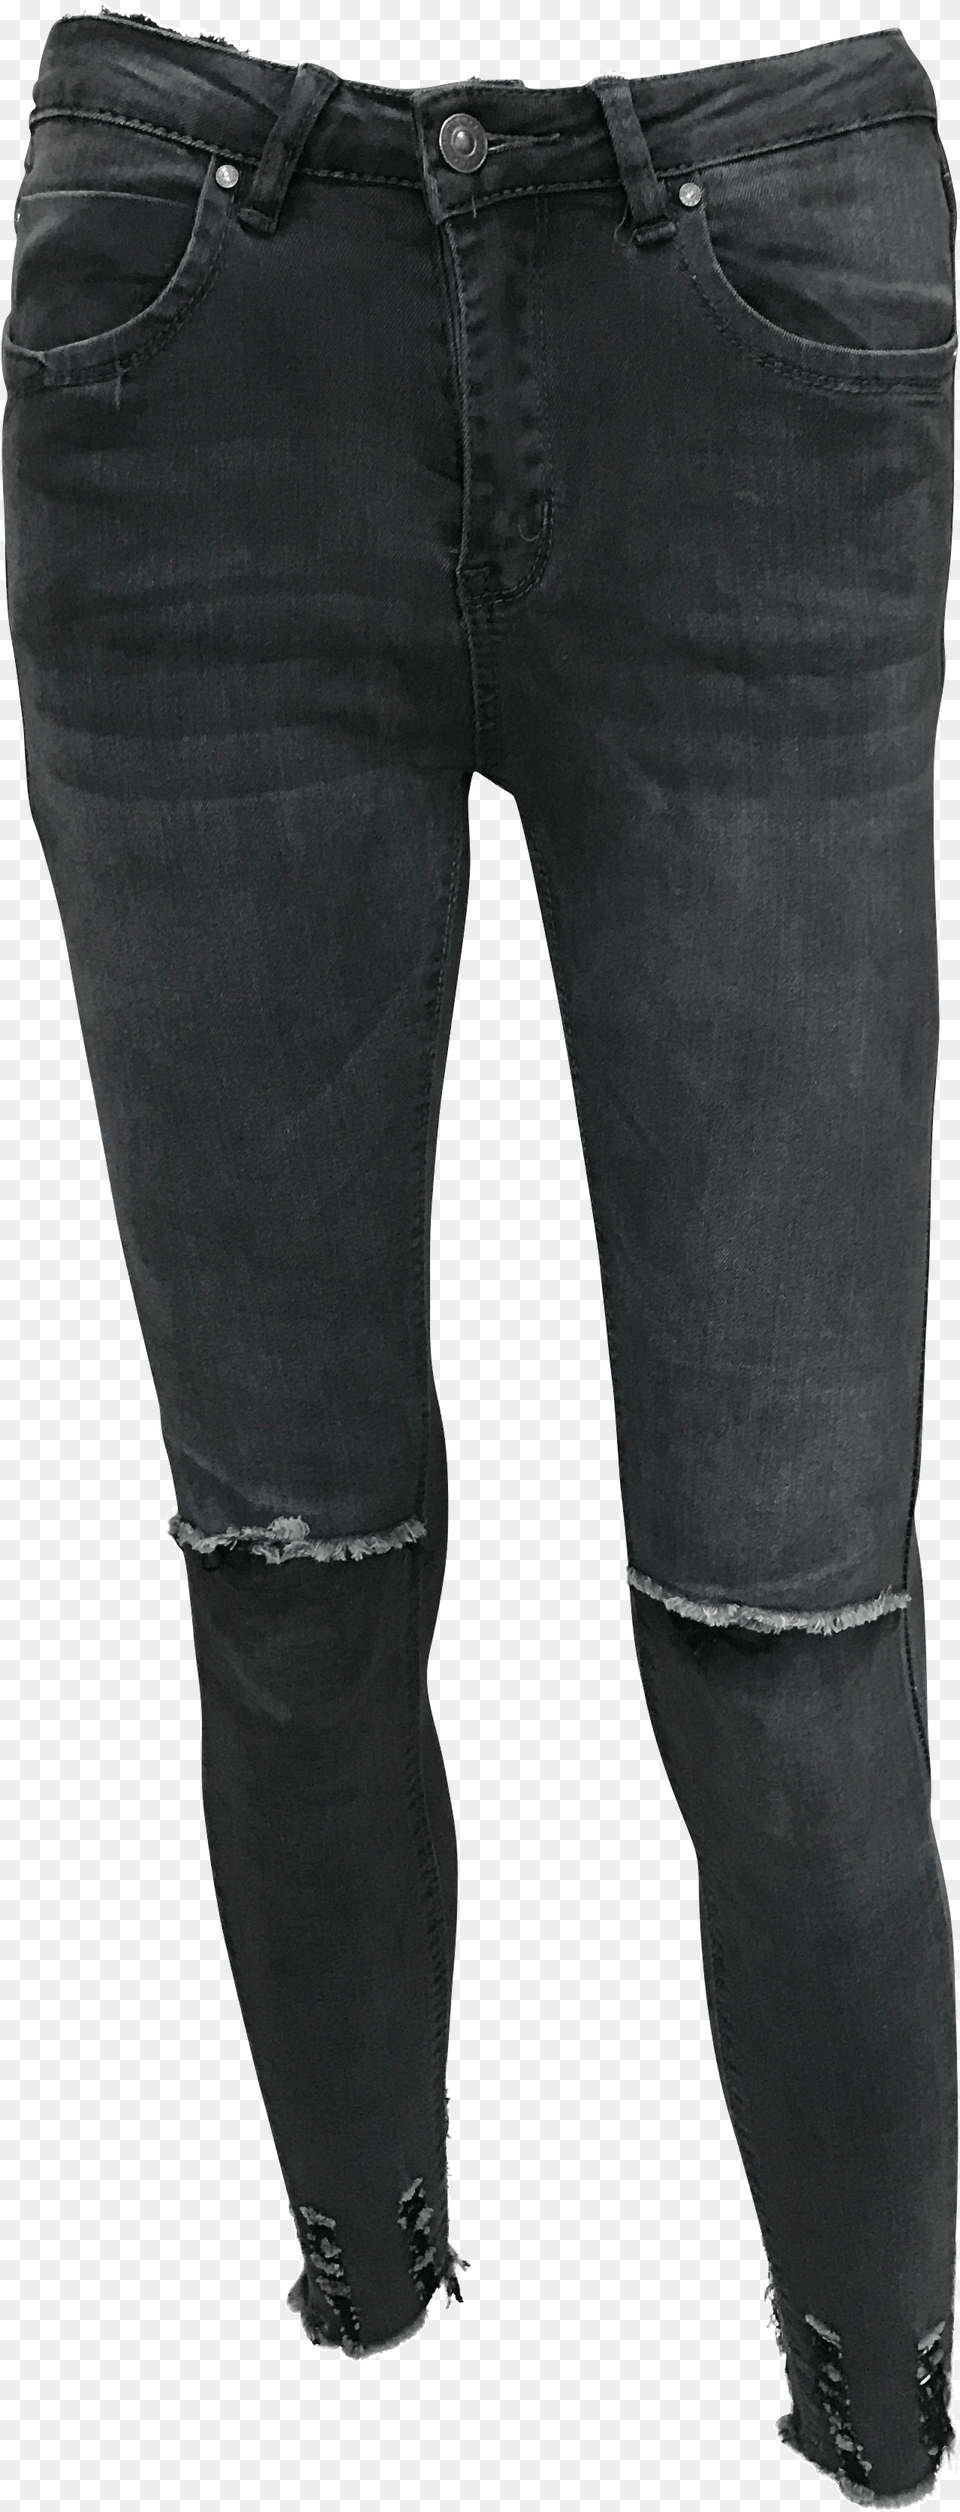 Black Skinny Jeans Trousers, Clothing, Pants Png Image